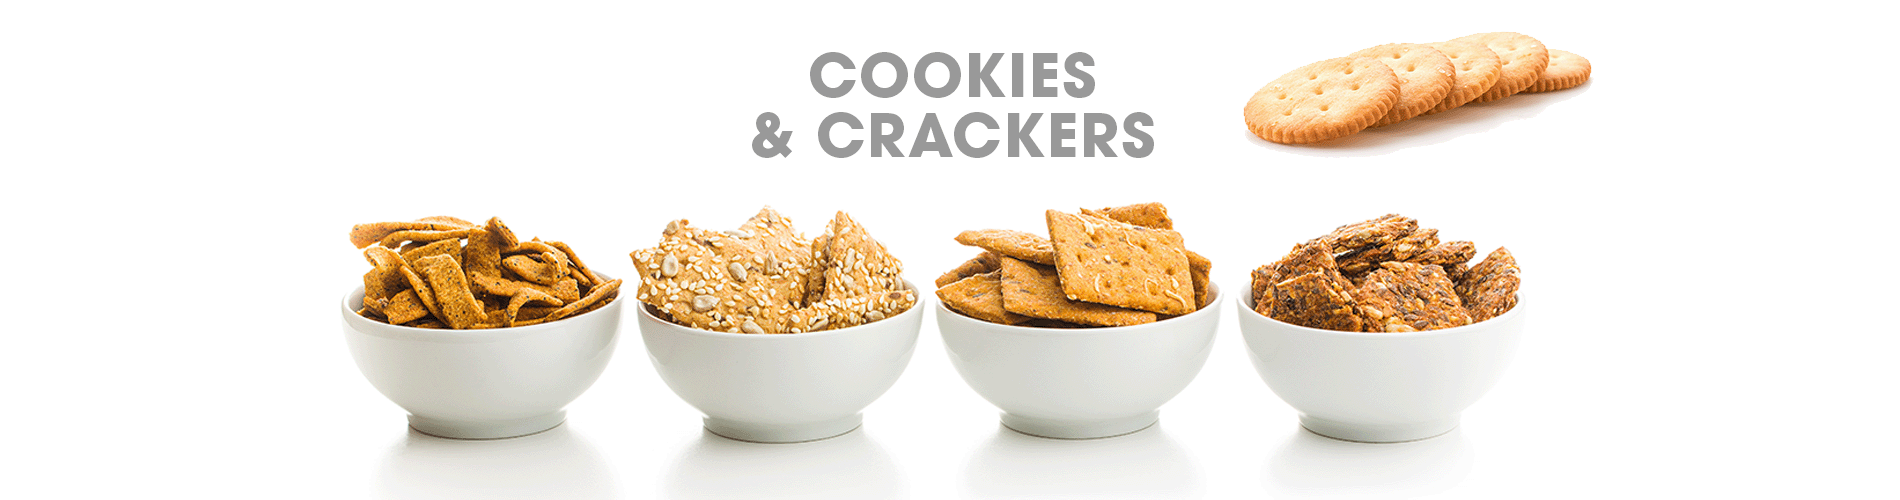 Category - Cookies & Crackers 1900x500